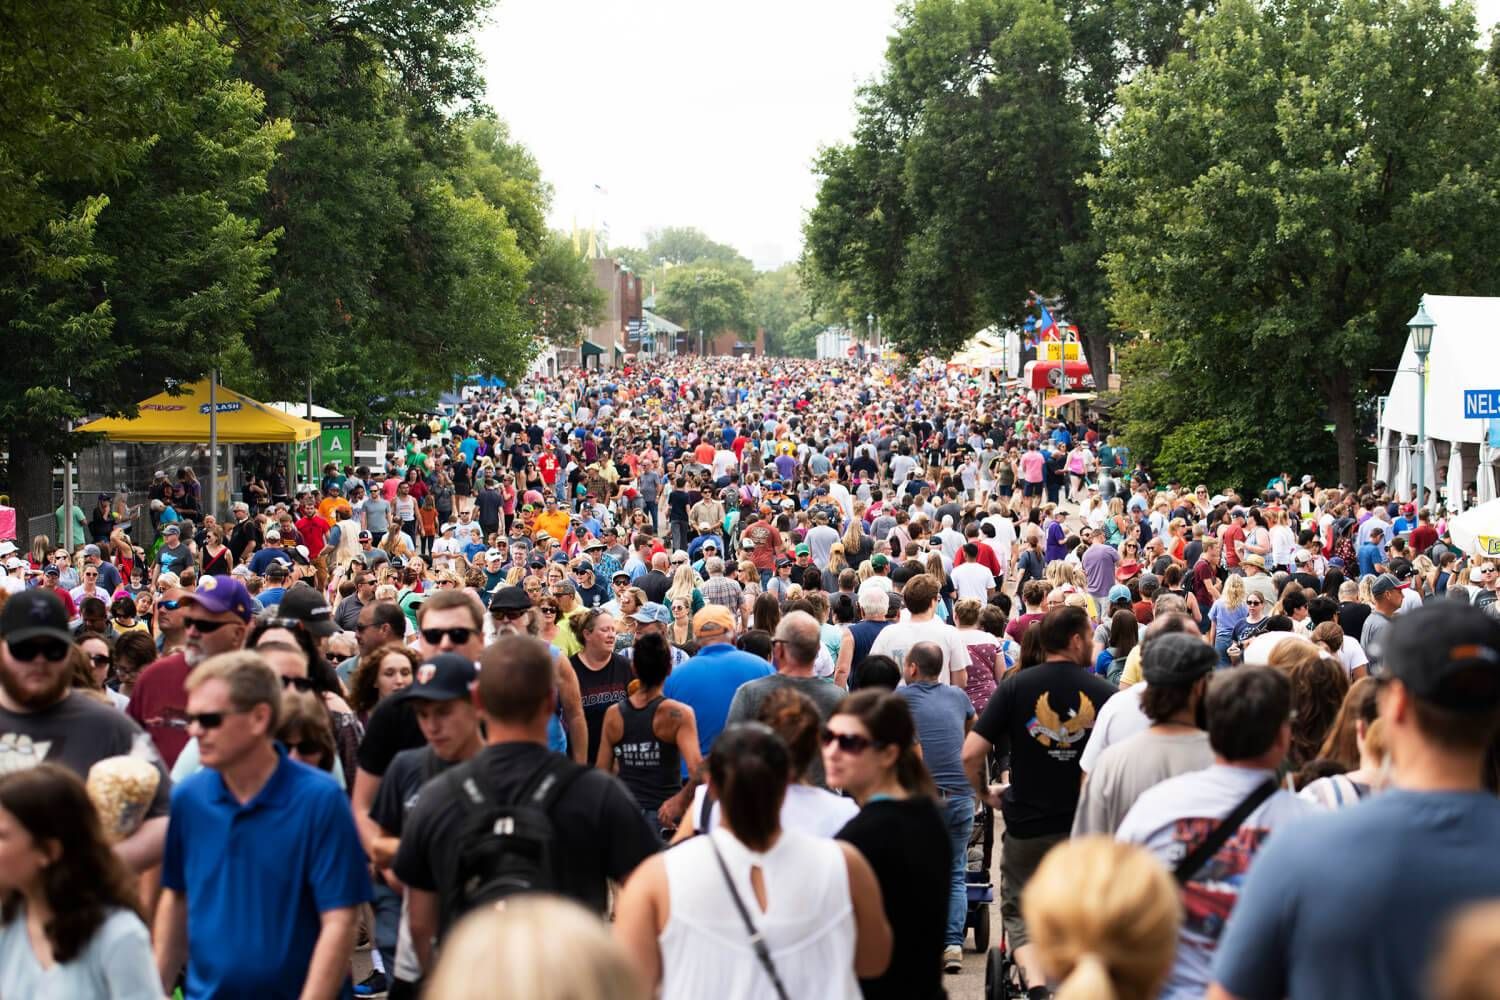 The swarming crowd at the Minnesota State Fair. Photo by Matt Mead.